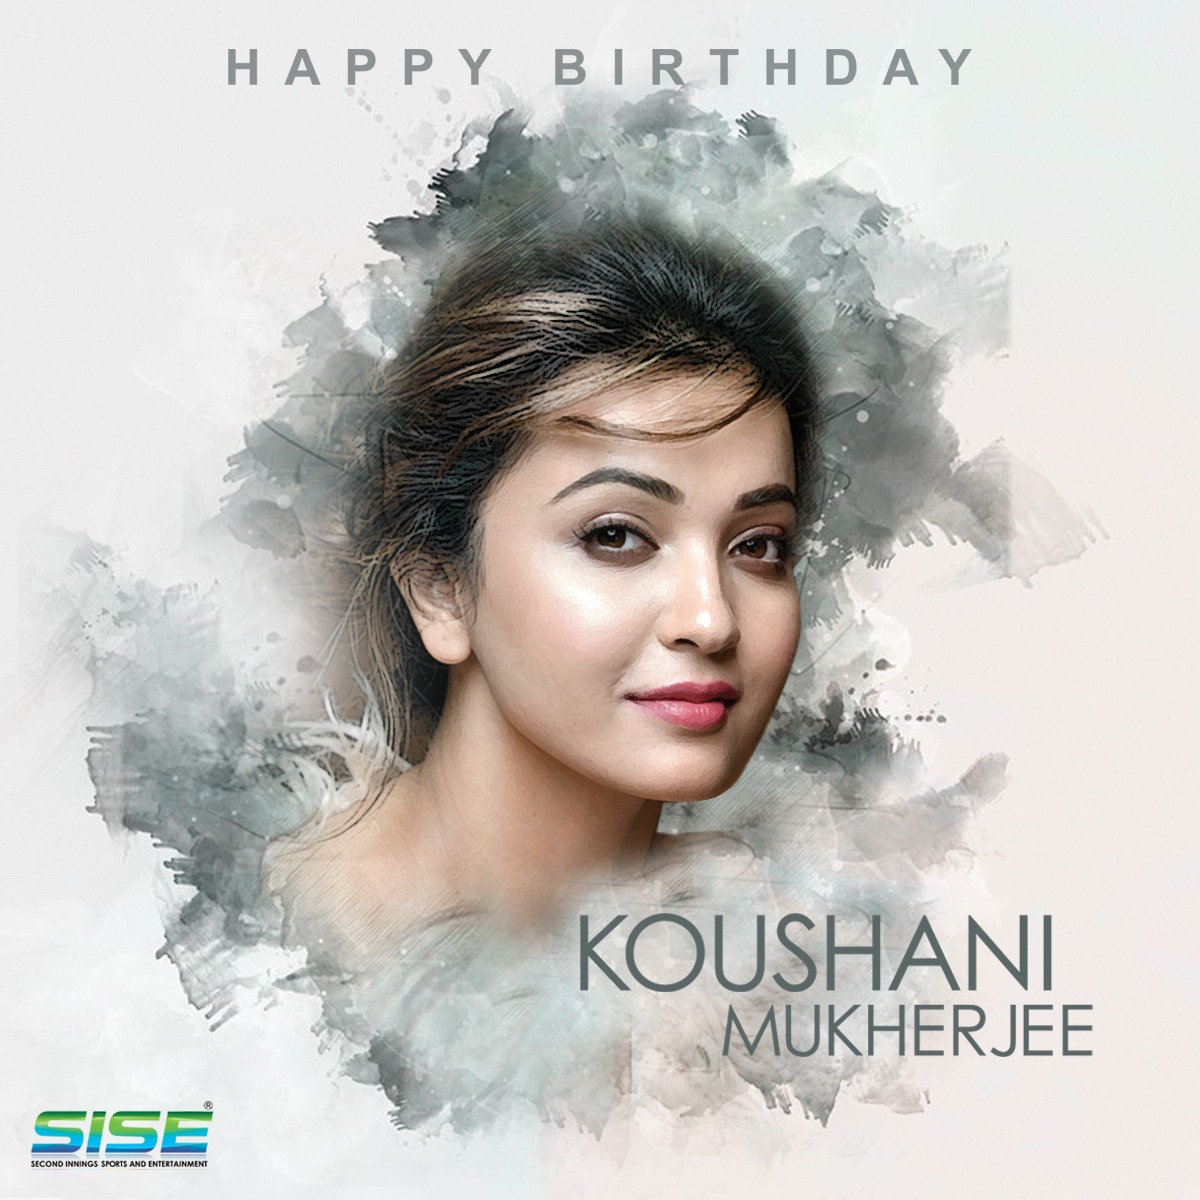 Wishing the super gorgeous and stunning @KoushaniMukher1 a very Happy Birthday! May you have a fantastic year ahead!! . . . #SISE #KoushaniMukherjee